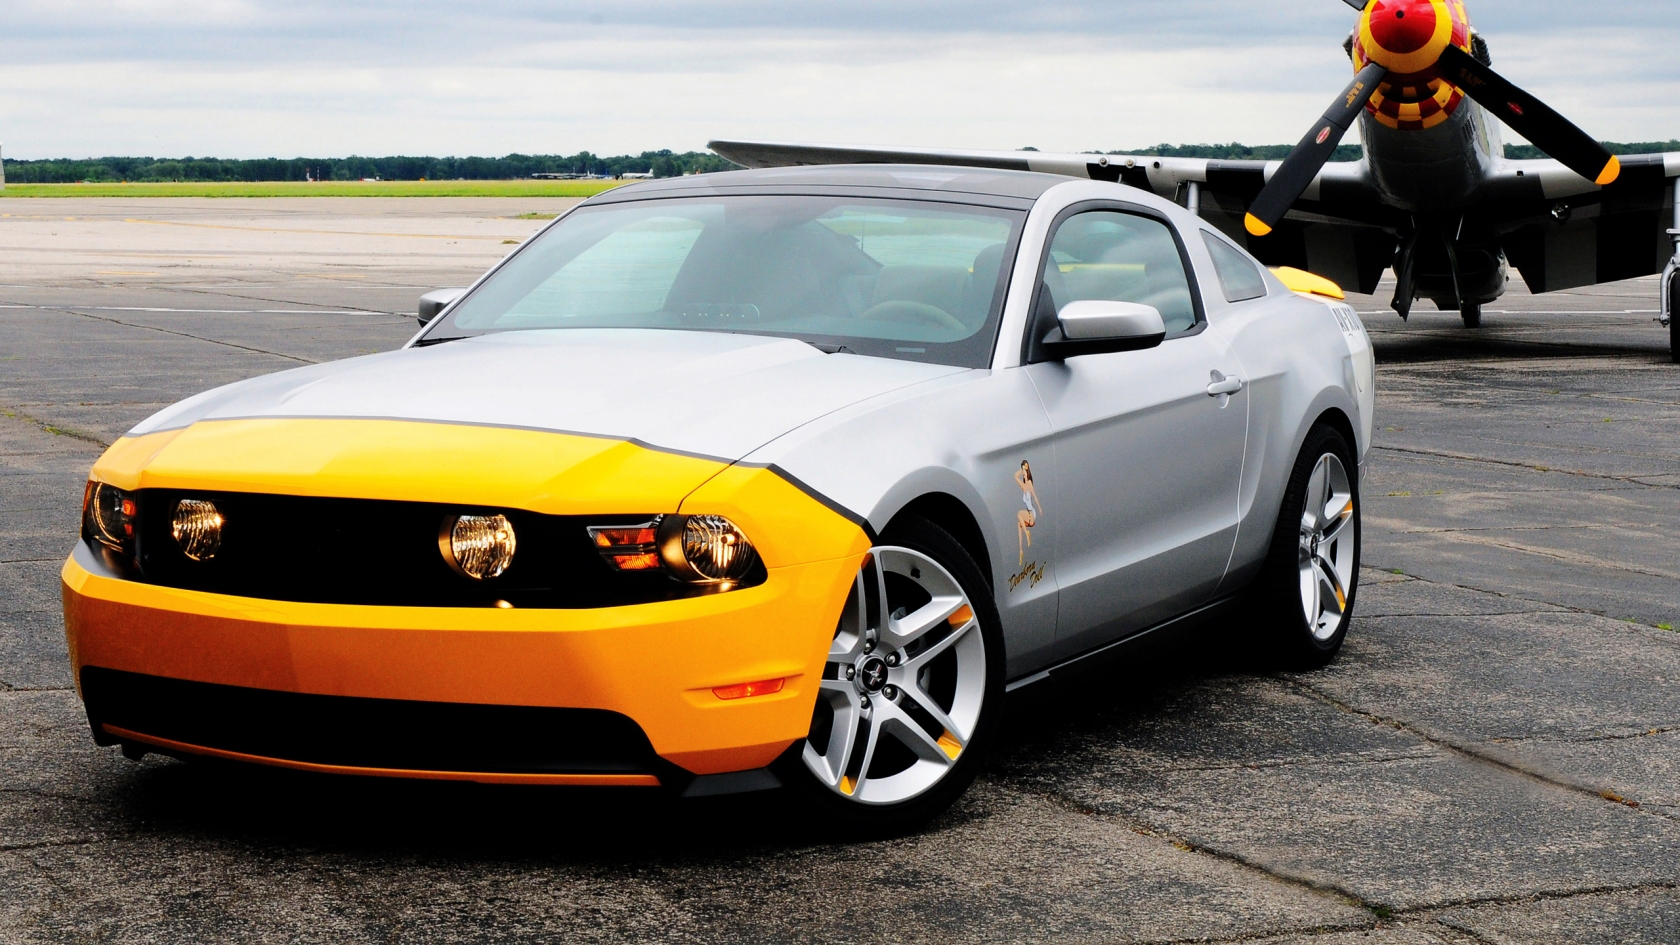 Ford Mustang Dearborn Doll for 1680 x 945 HDTV resolution